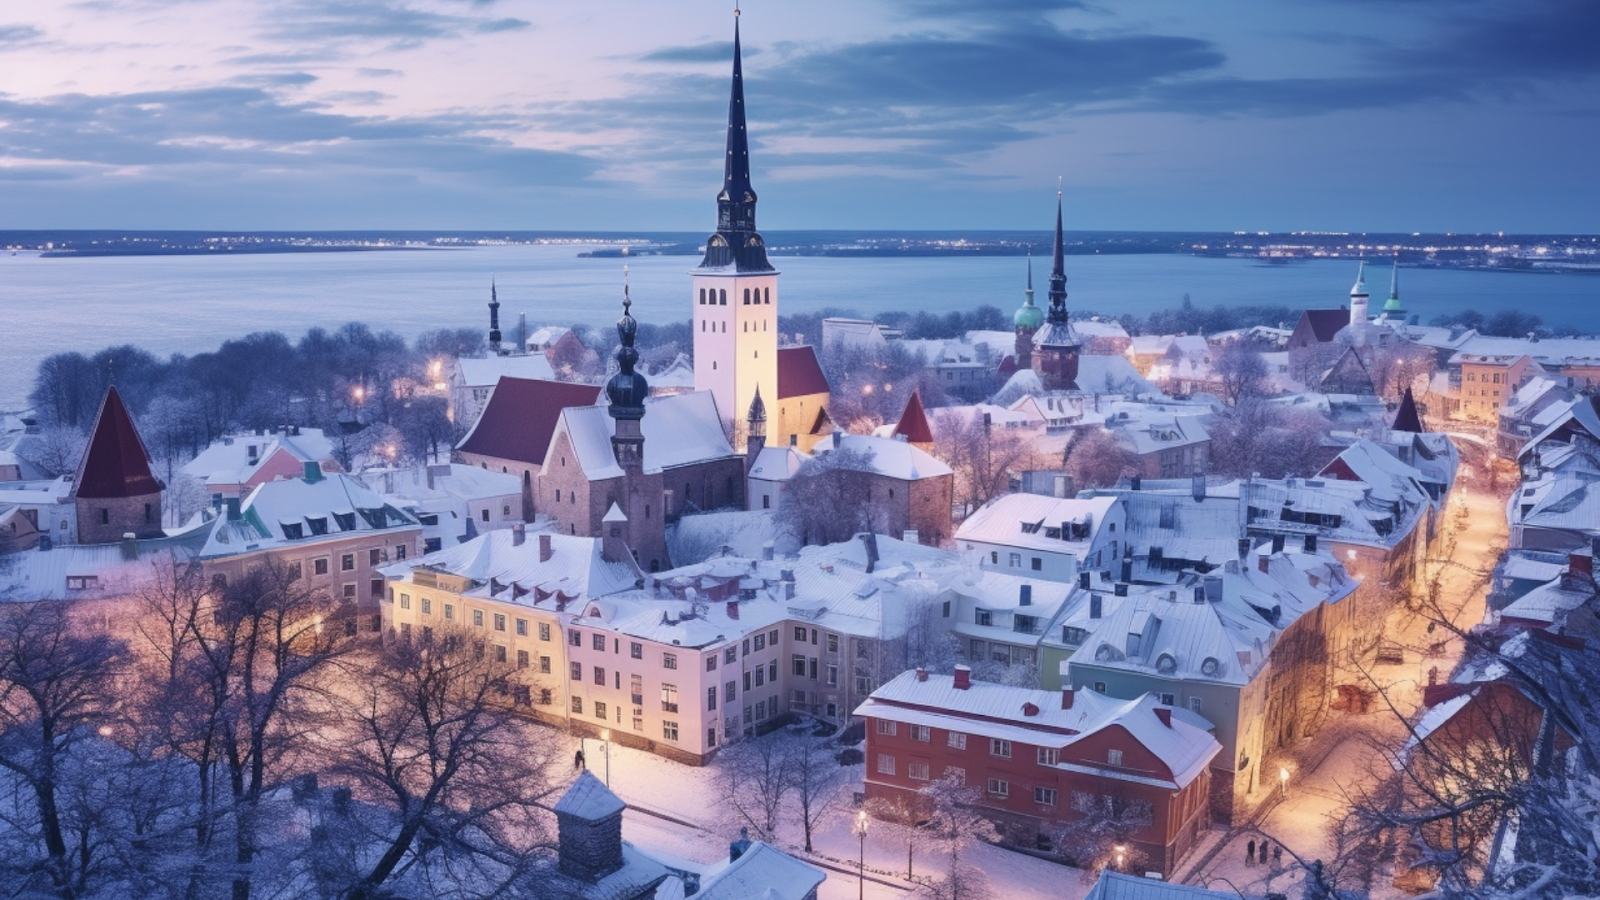 Snow-covered rooftops of Tallinn, Estonia during winter, a magical scene from one of the top Europe destinations.